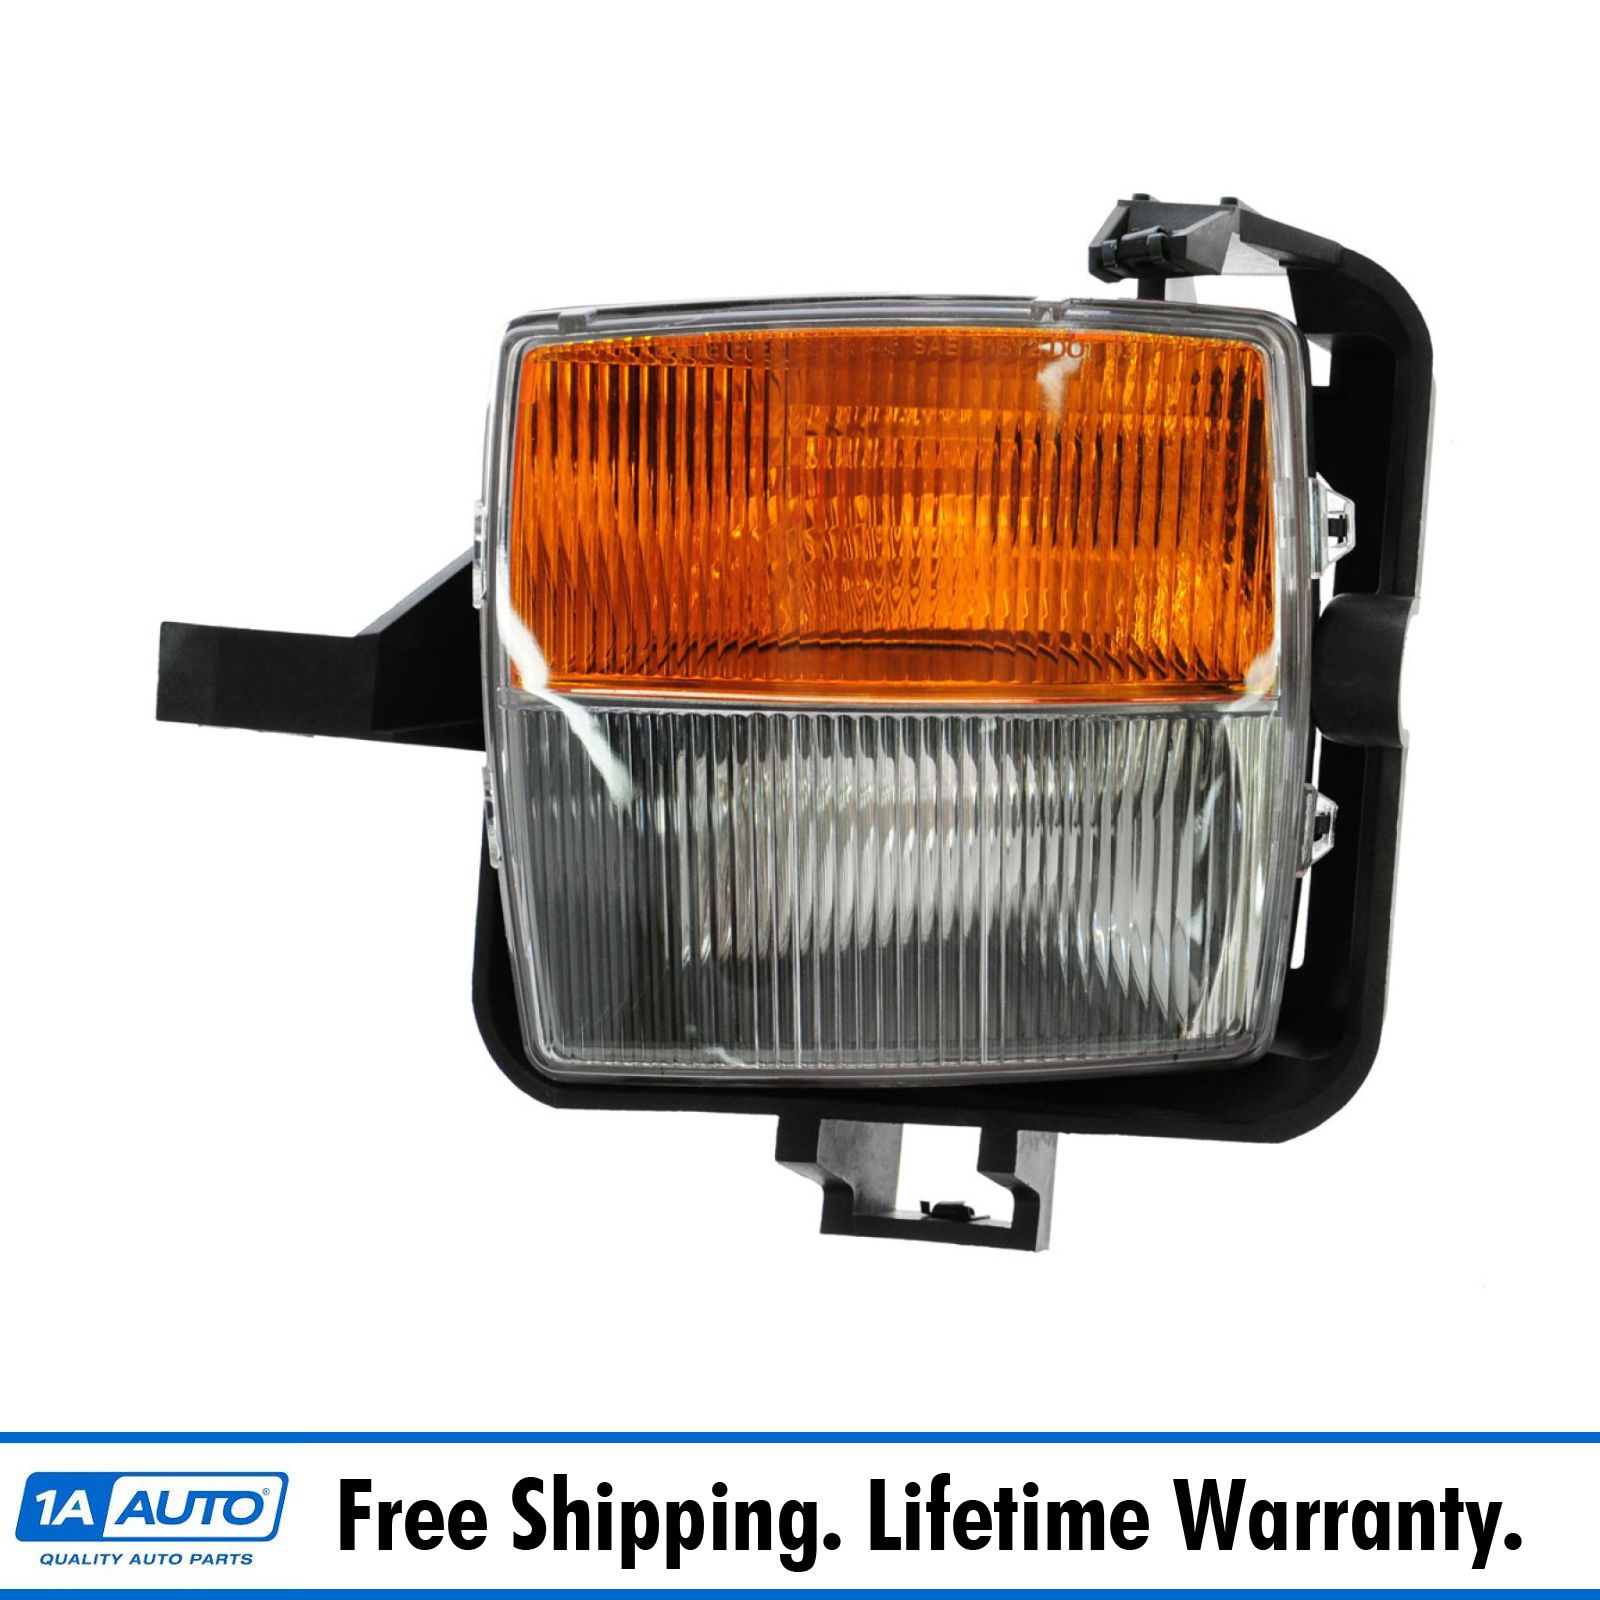 Fog Driving Light Turn Signal Lamp Driver Side Left LH for 03-07 Cadillac CTS | eBay 2004 Cadillac Cts Front Turn Signal Bulb